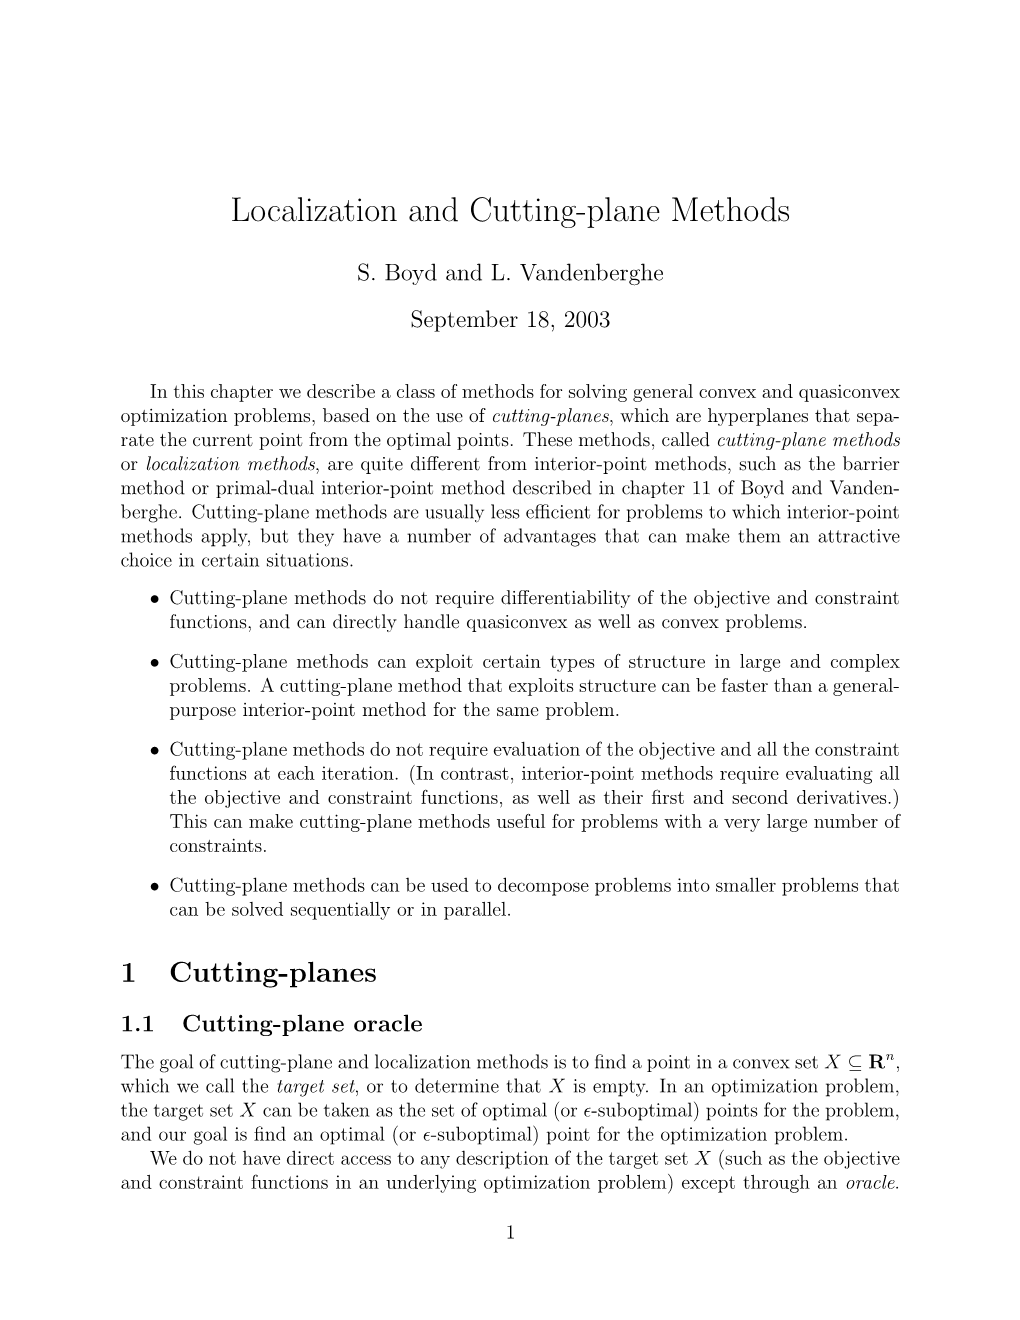 Localization and Cutting-Plane Methods